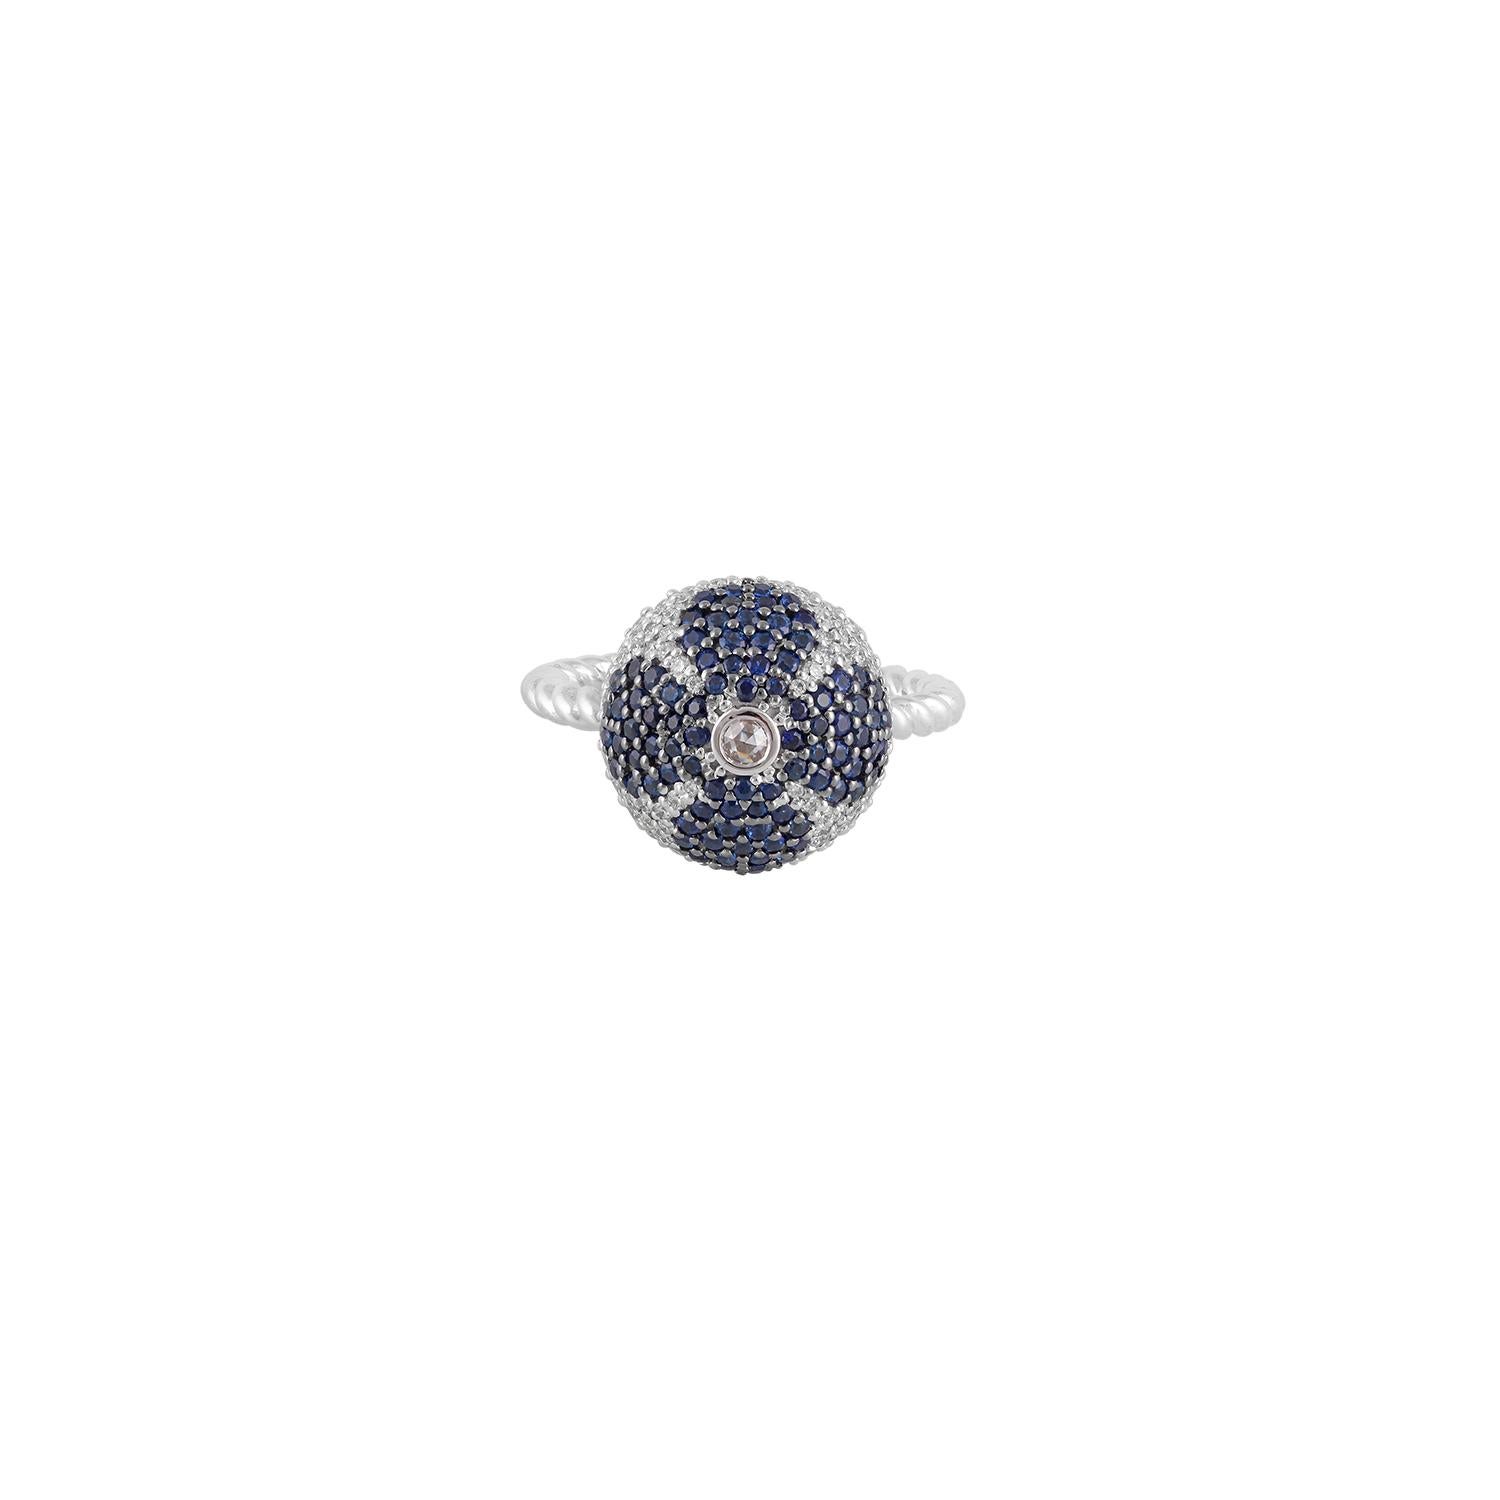 One dome ring set in Centre with natural blue sapphires with brilliant cut white diamonds finish in 18kt white gold.

92 natural blue sapphires 0.81ct total weight


22 Rose cut natural diamonds 0.03 CT total weight
22 brilliant cut natural diamonds